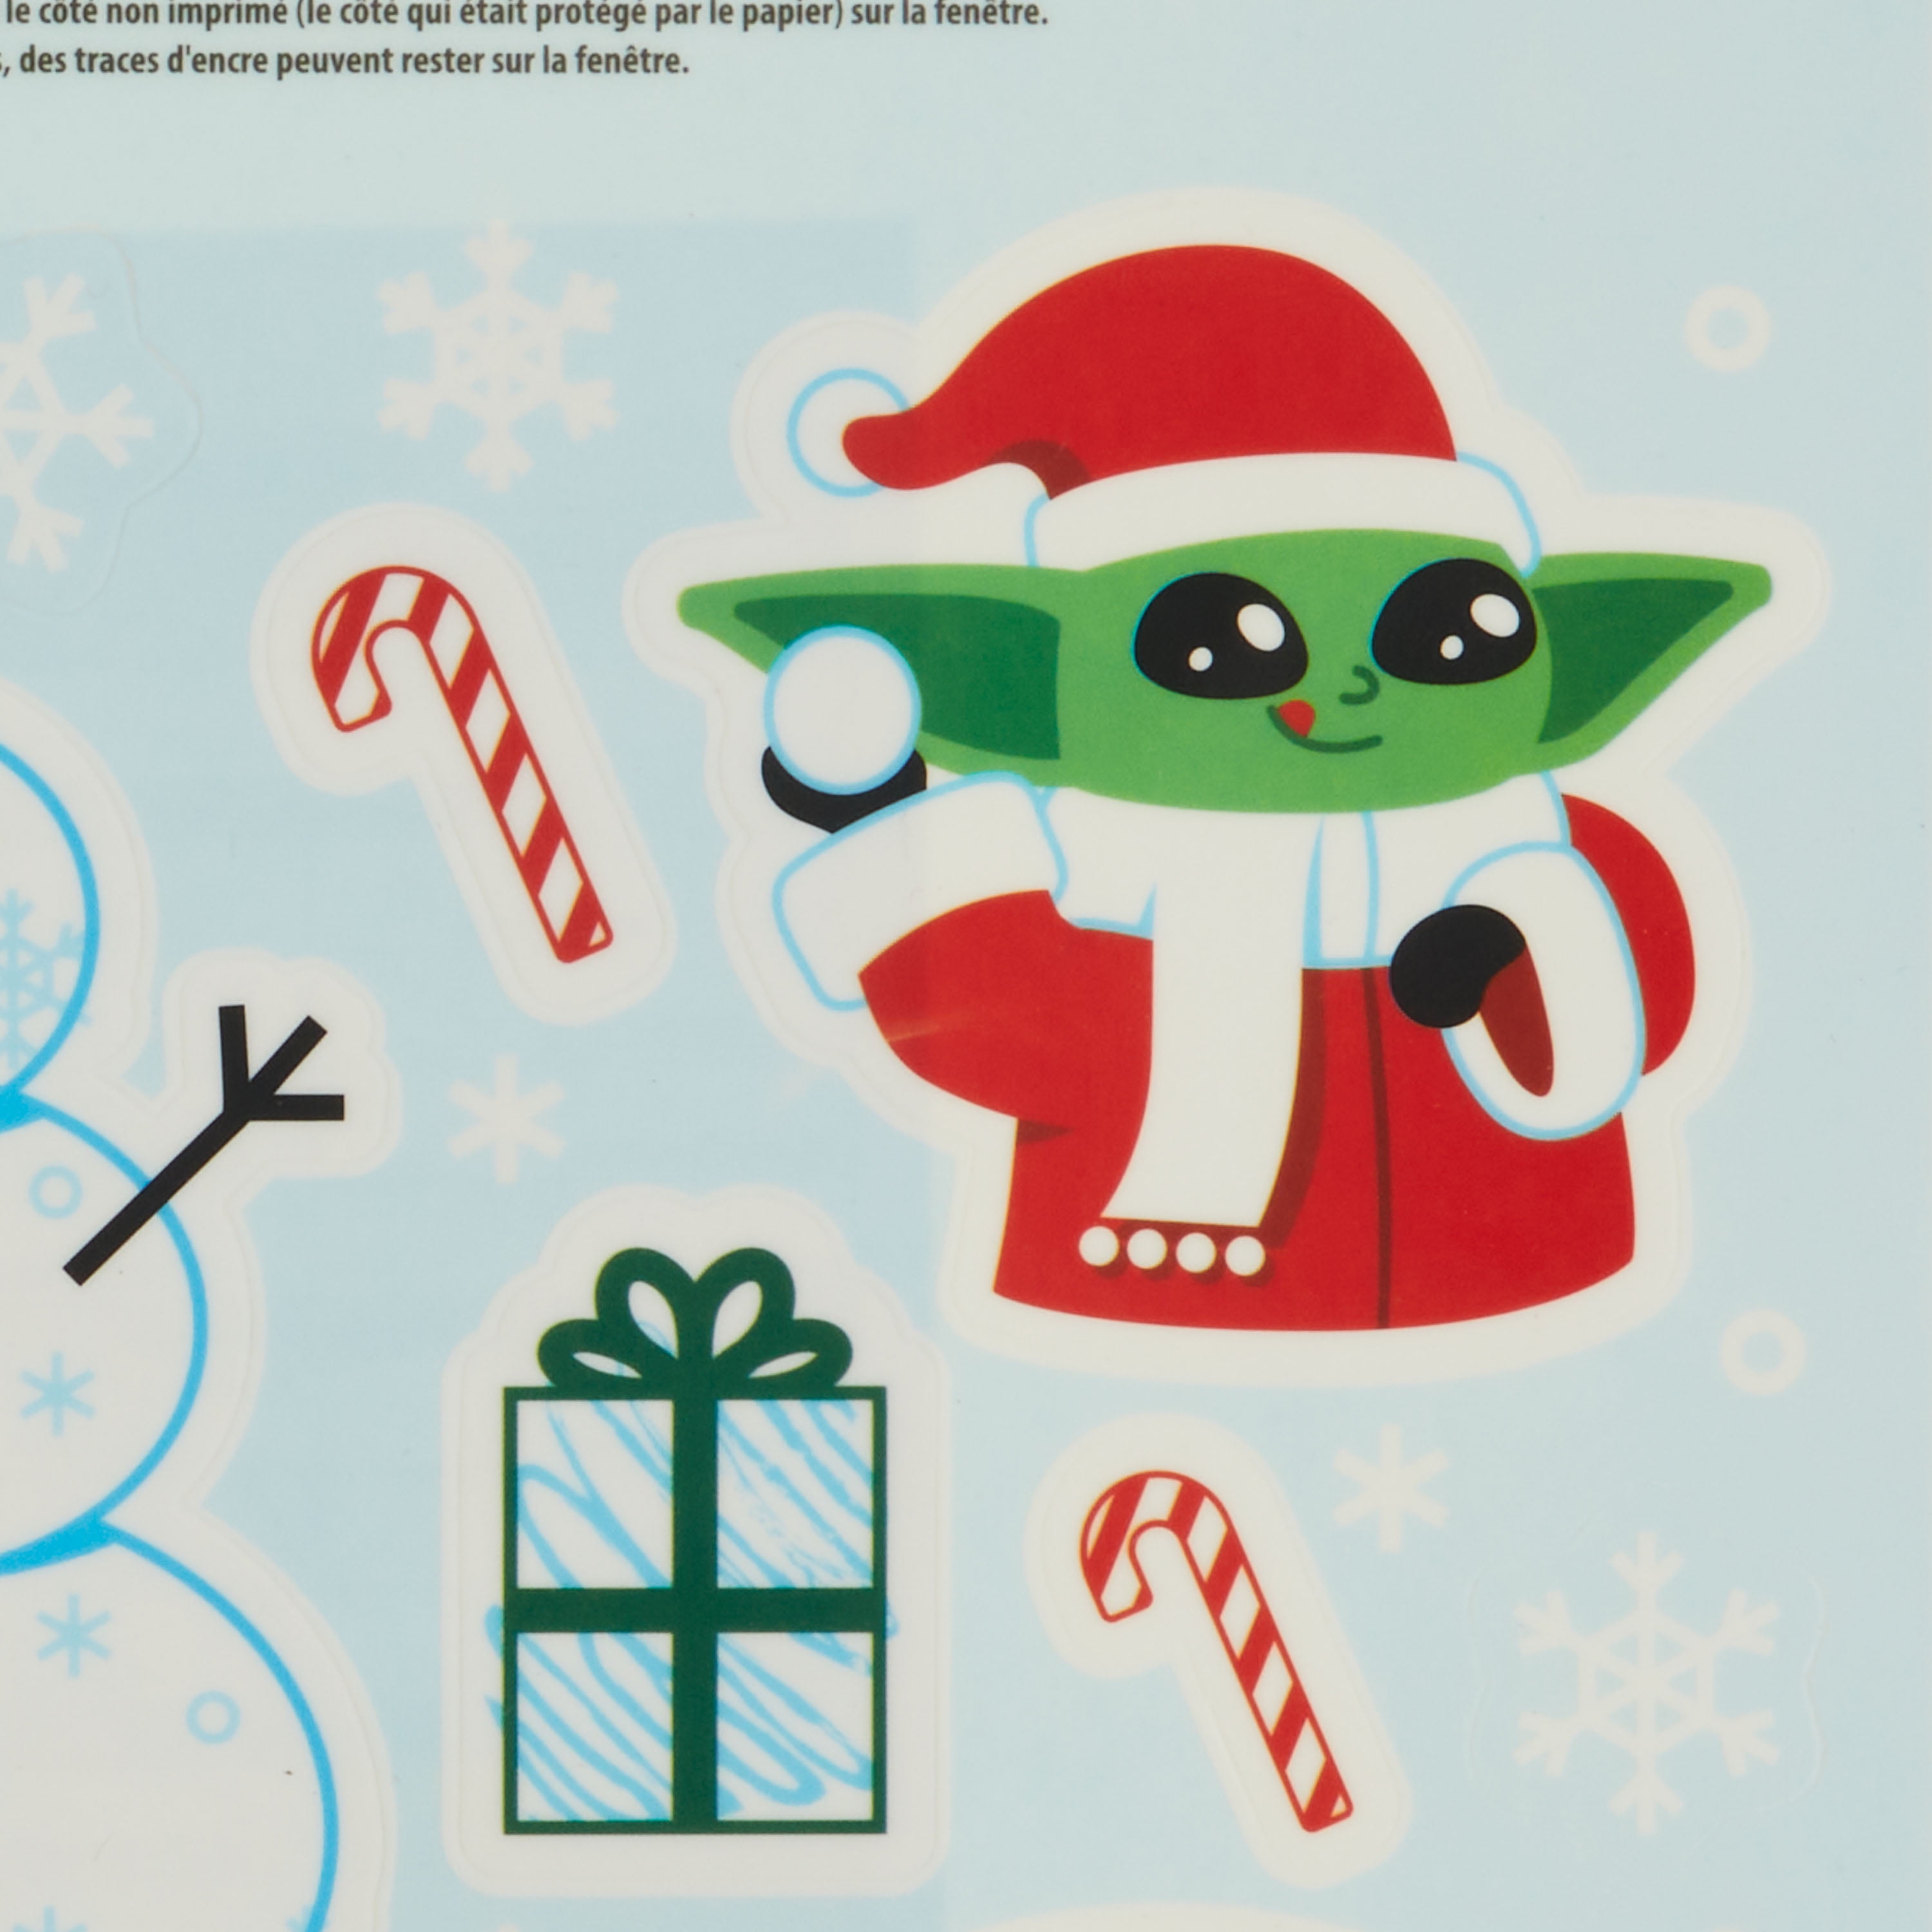  Star Wars Christmas Decorations - Yoda with Santa Claus Hat -  Jedi Holiday Vinyl Wall Decal for Home Decor and Parties : Handmade Products